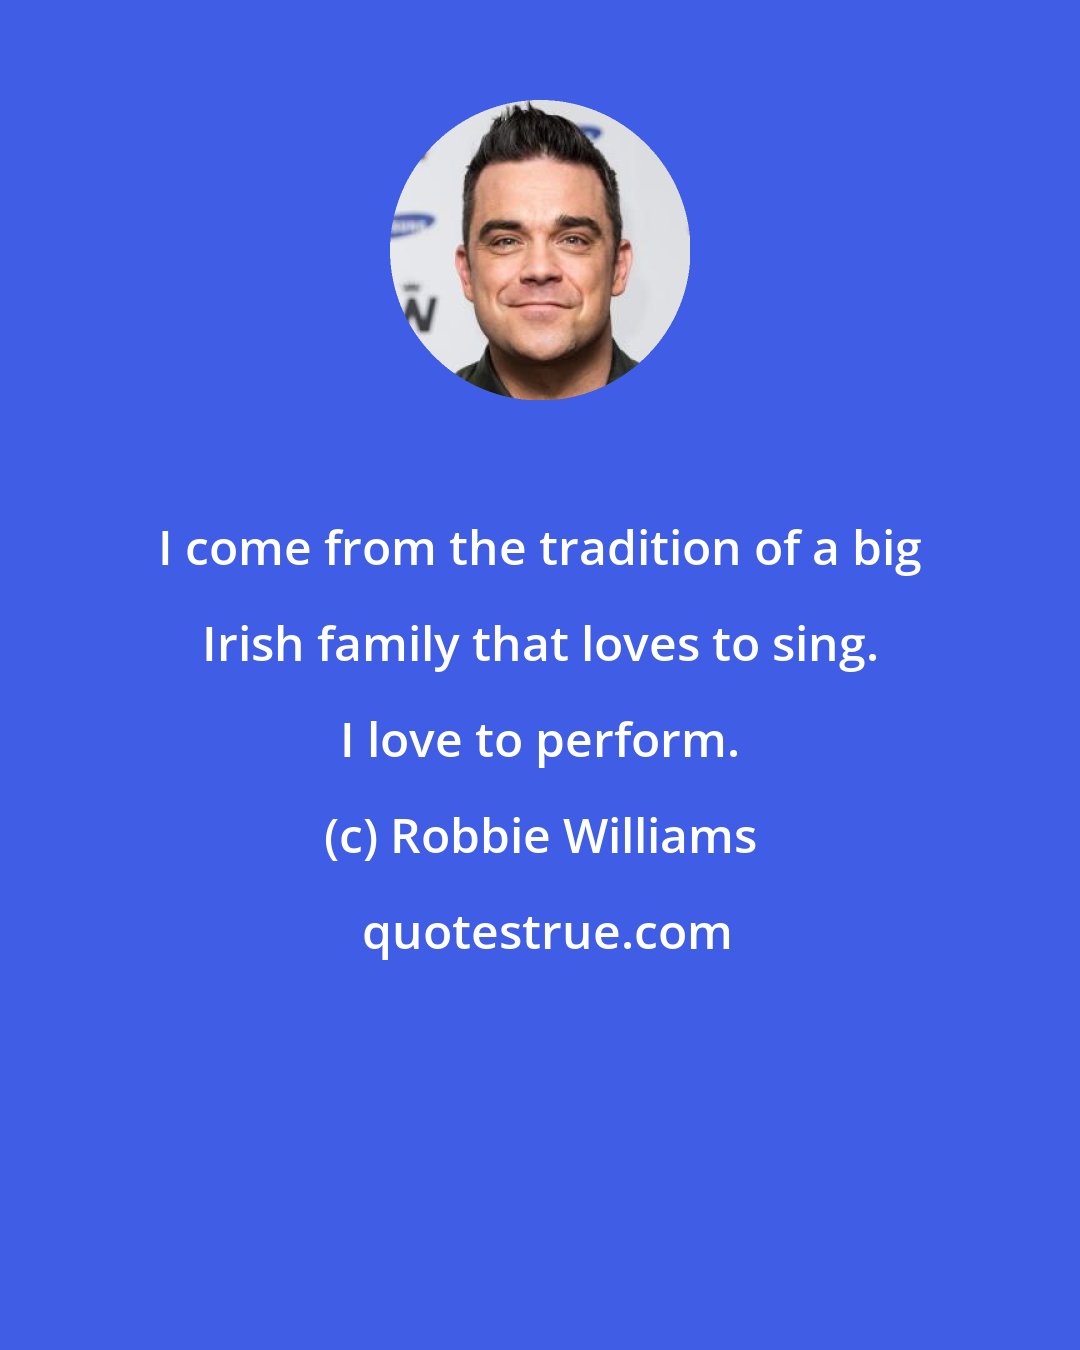 Robbie Williams: I come from the tradition of a big Irish family that loves to sing. I love to perform.